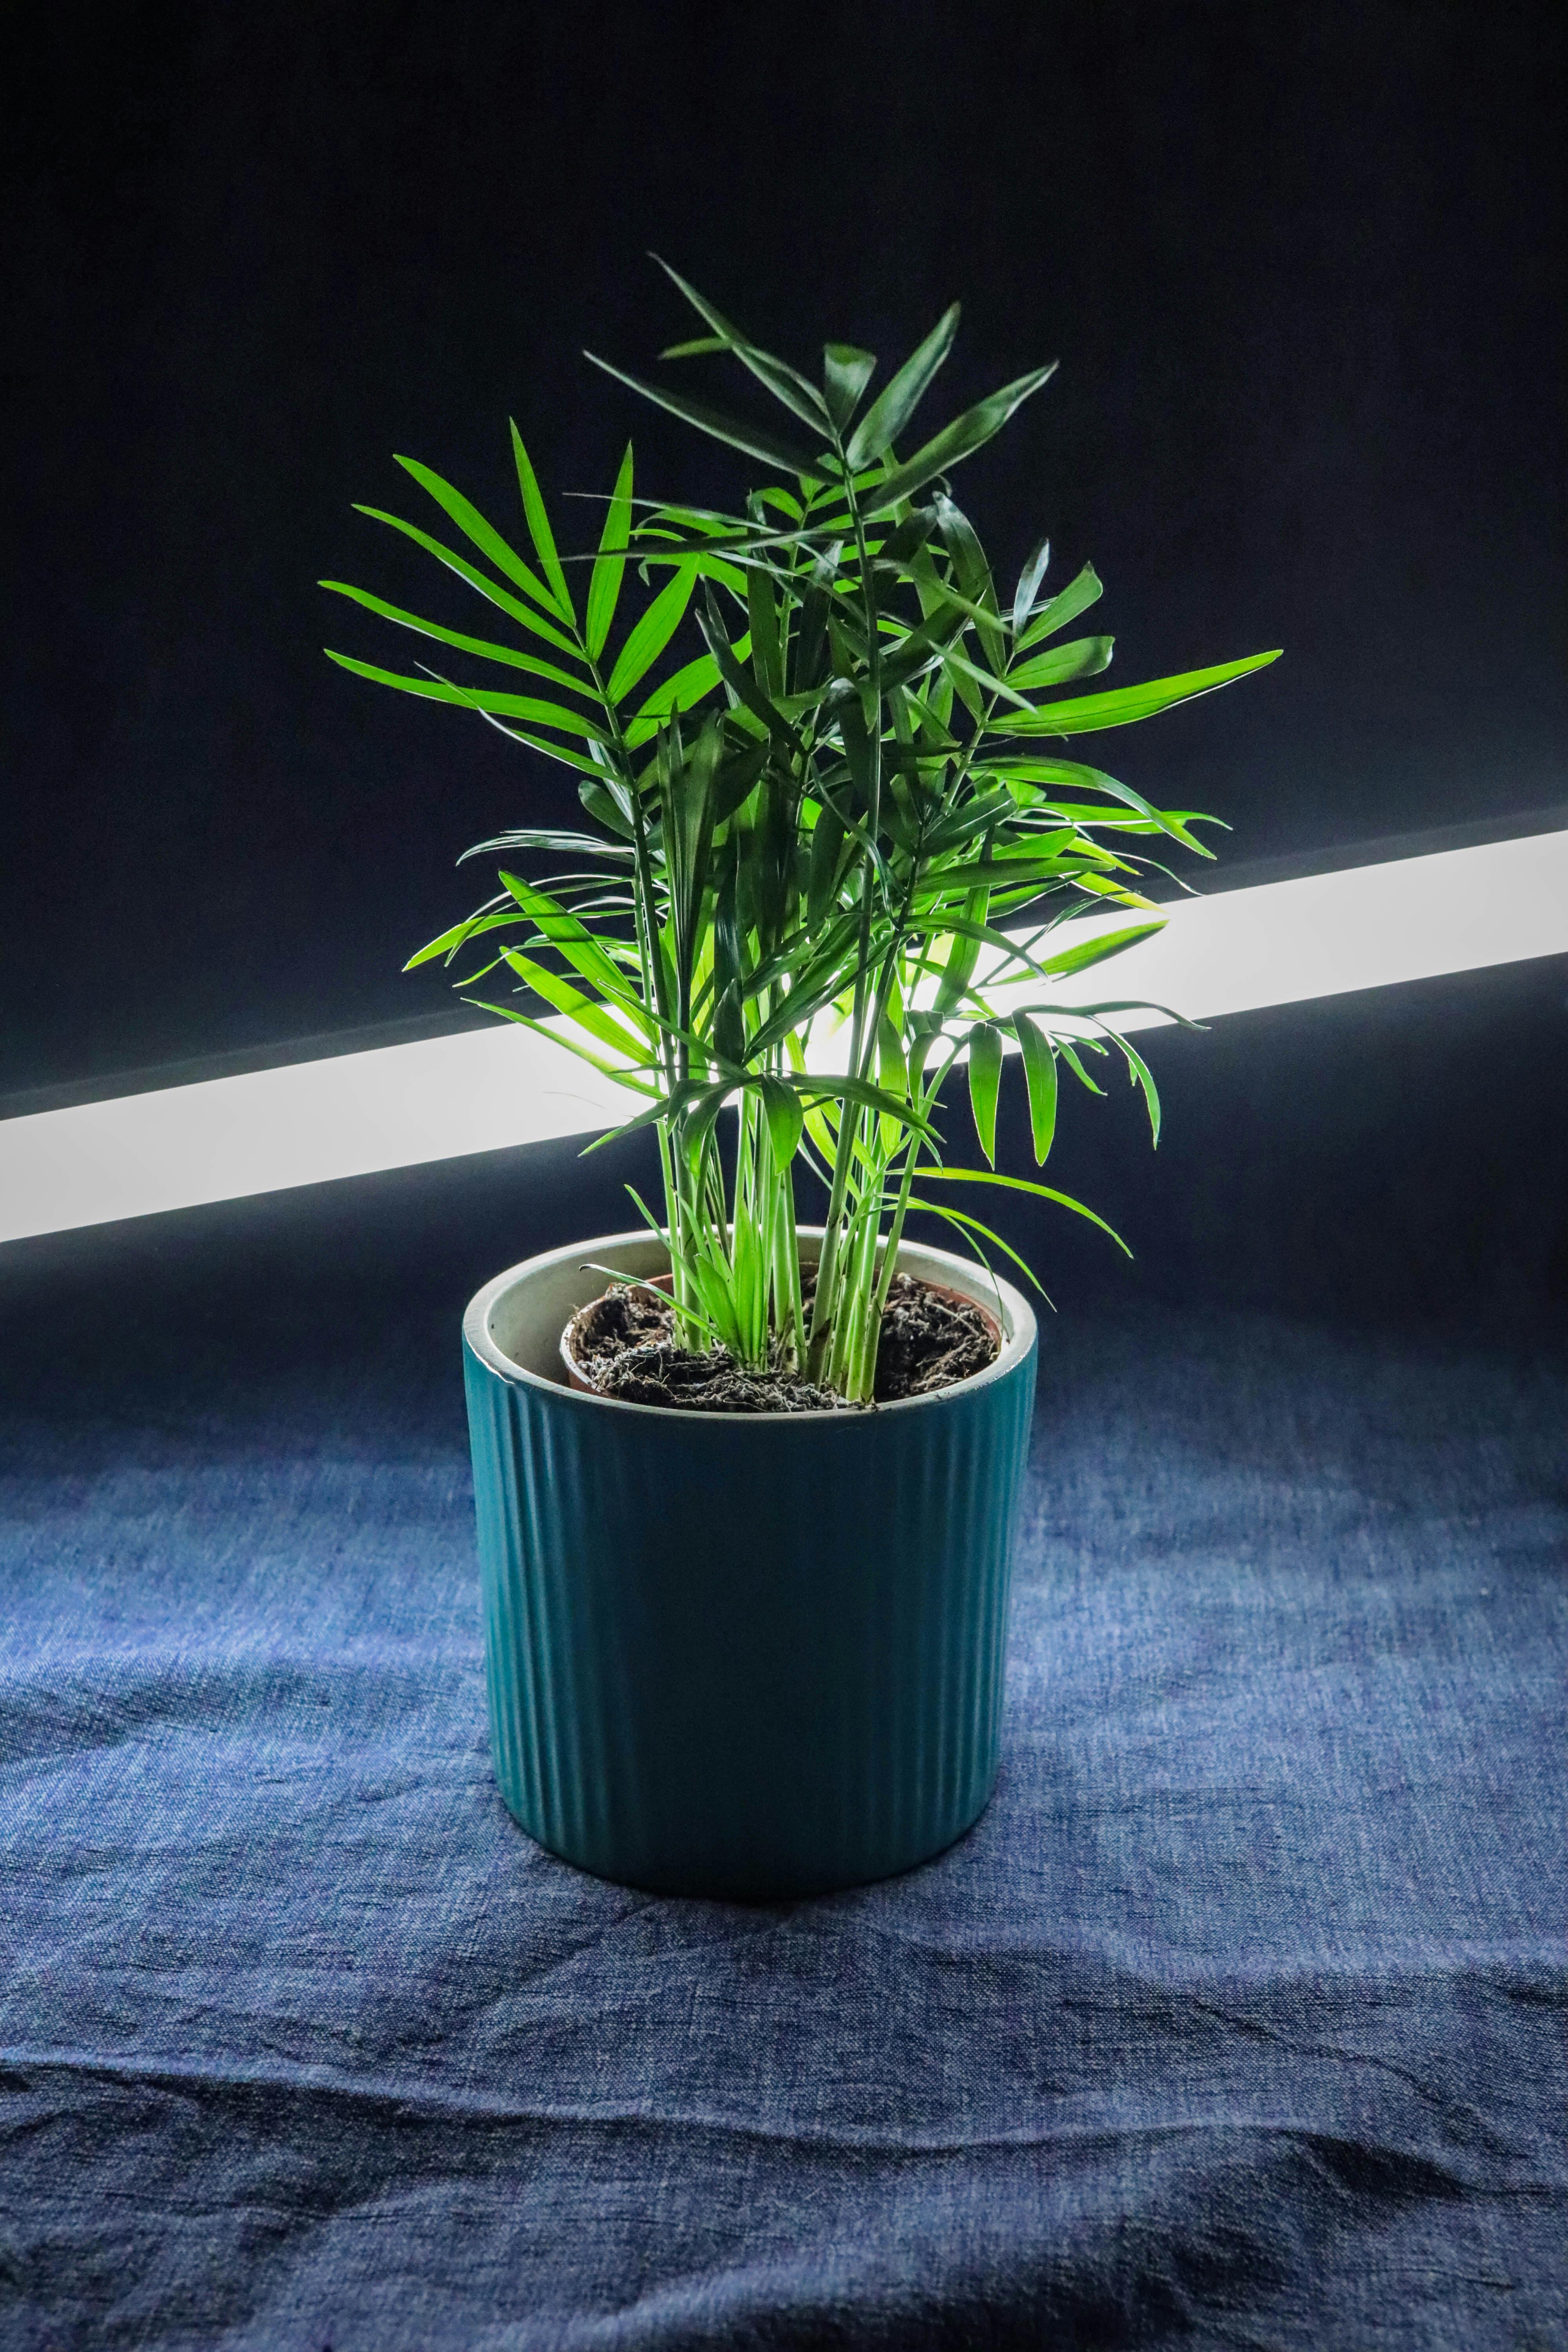 Free Green Potted Plant on Blue Textile Stock Photo